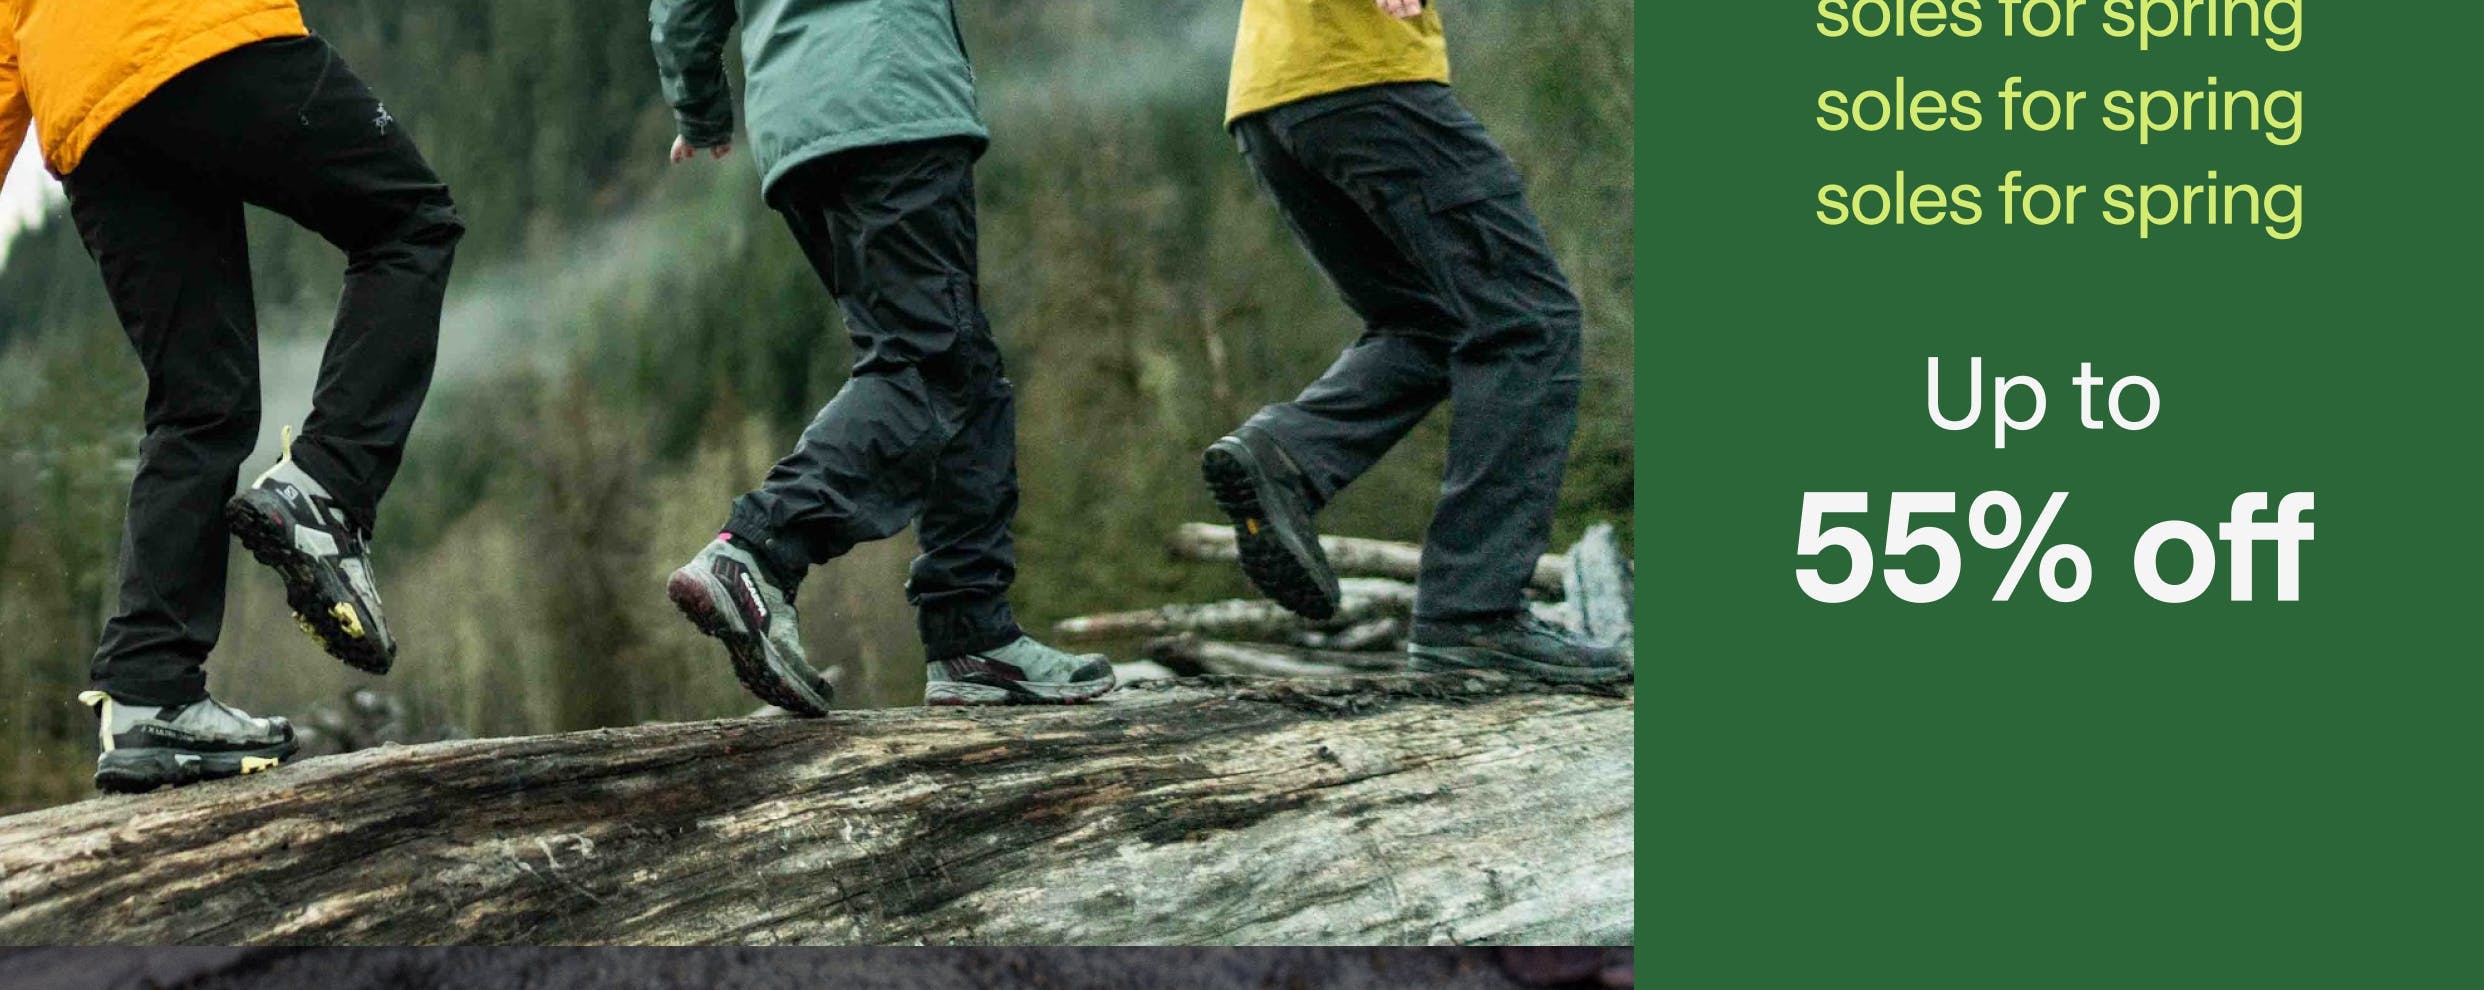 Up to 55% off footwear for any trail